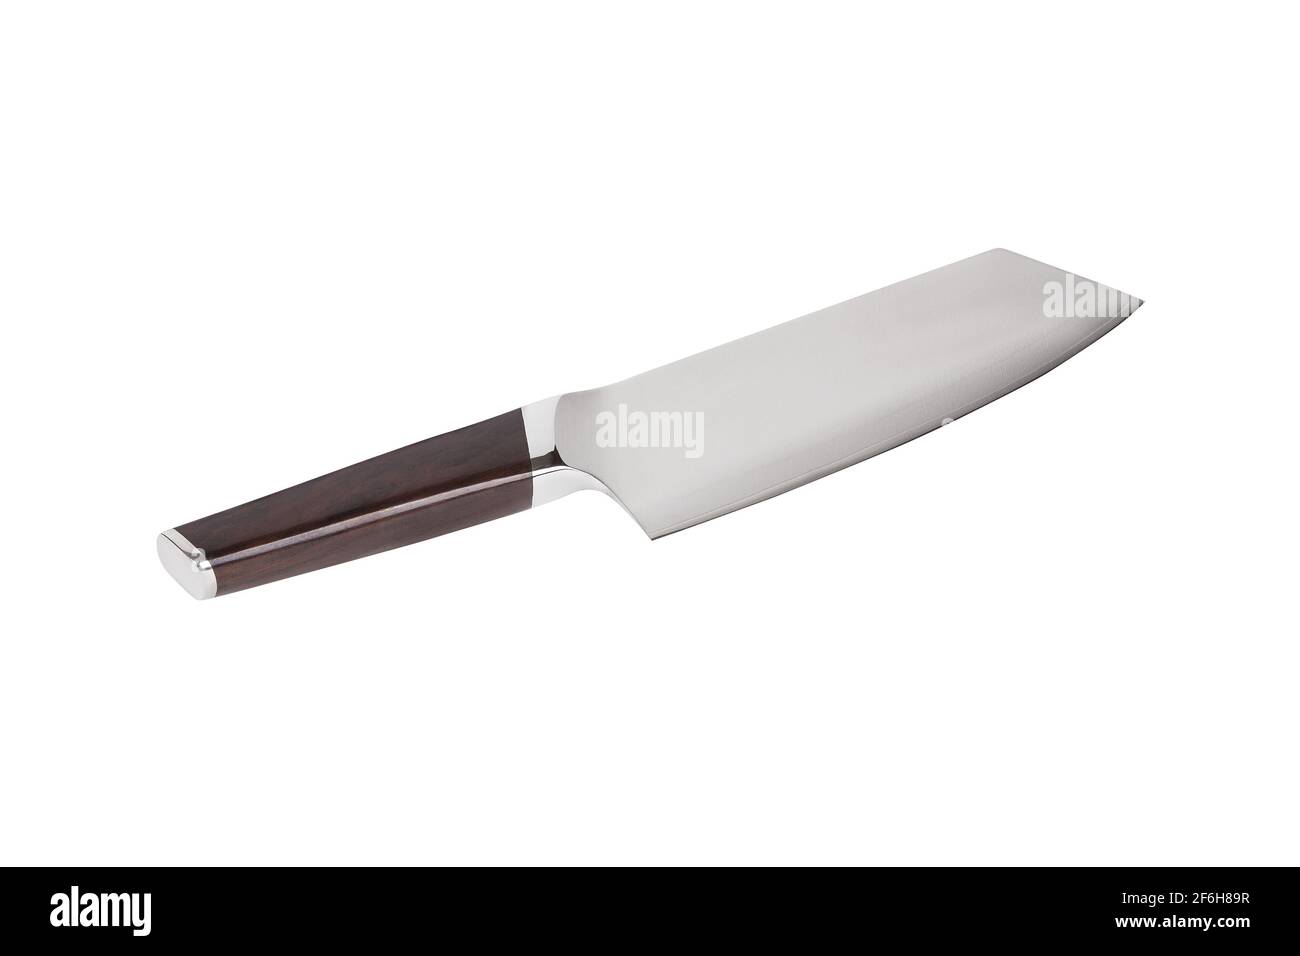 Stainless steel kitchen knife for chopping meat. Butcher's knife isolated on white background. Stock Photo